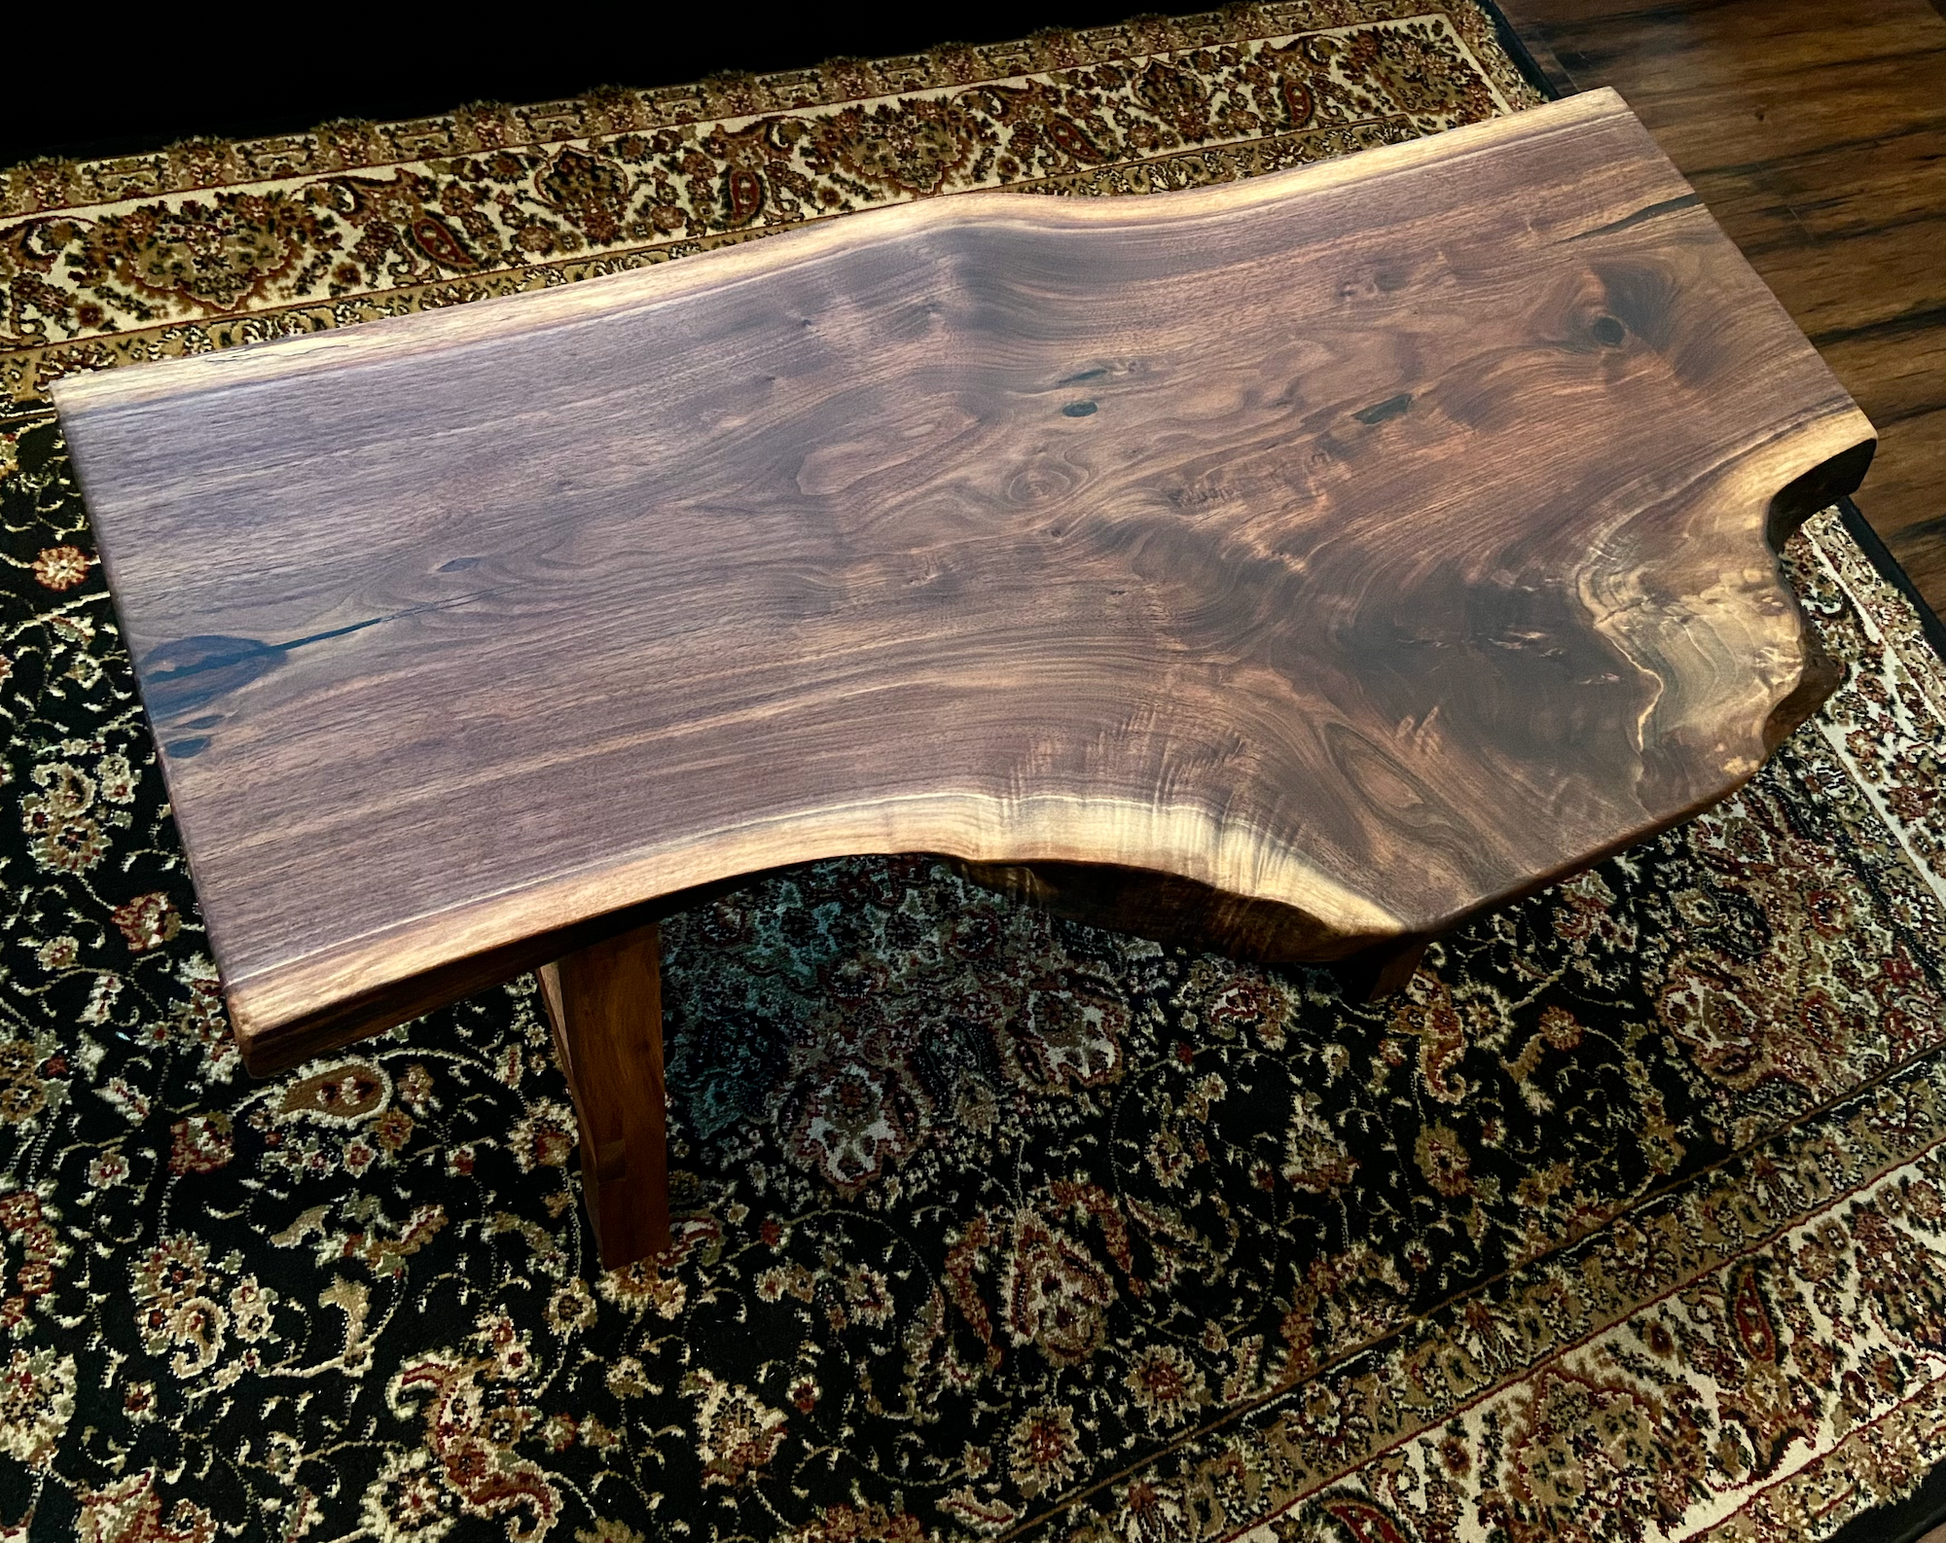  Walnut Rustic Live Edge Wood Table|Forked Walnut Wood Coffee Table|Natural Edge Wood Walnut Table|Rustic Wood Display Table w/Unique Grains